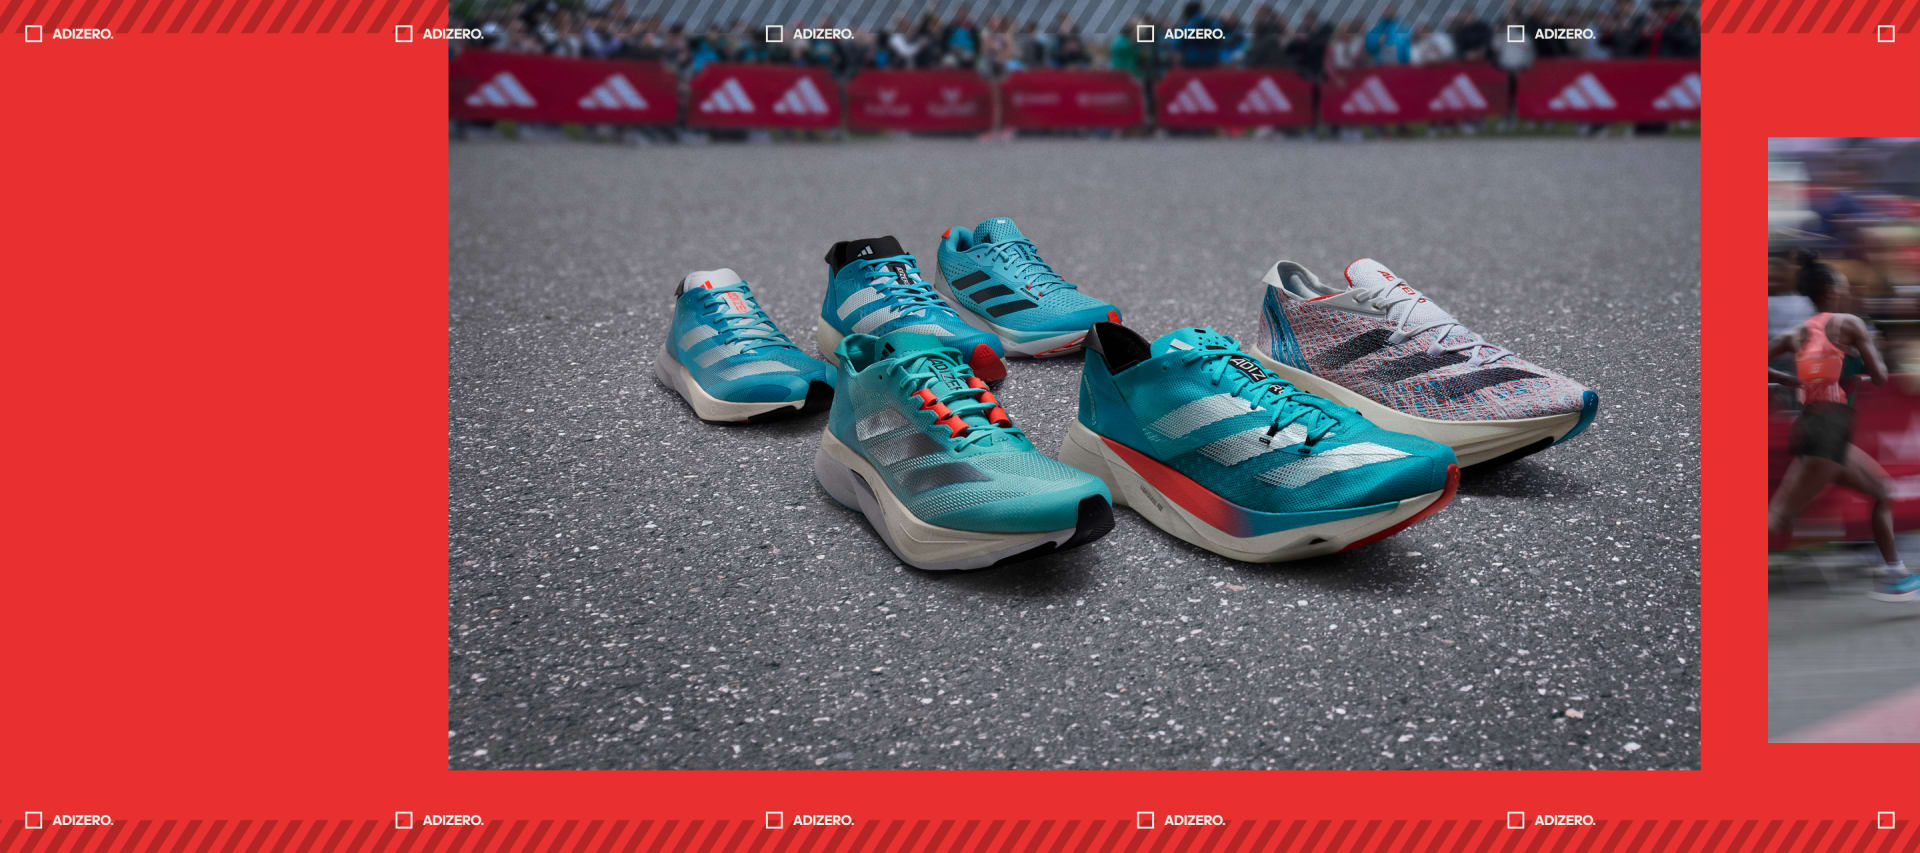 A selection of individual Adizero running shoes on the tarmac of a road race route, including the Prime X 2 Strung, Adios Pro 3, Boston 12 and Takumi Sen 9.